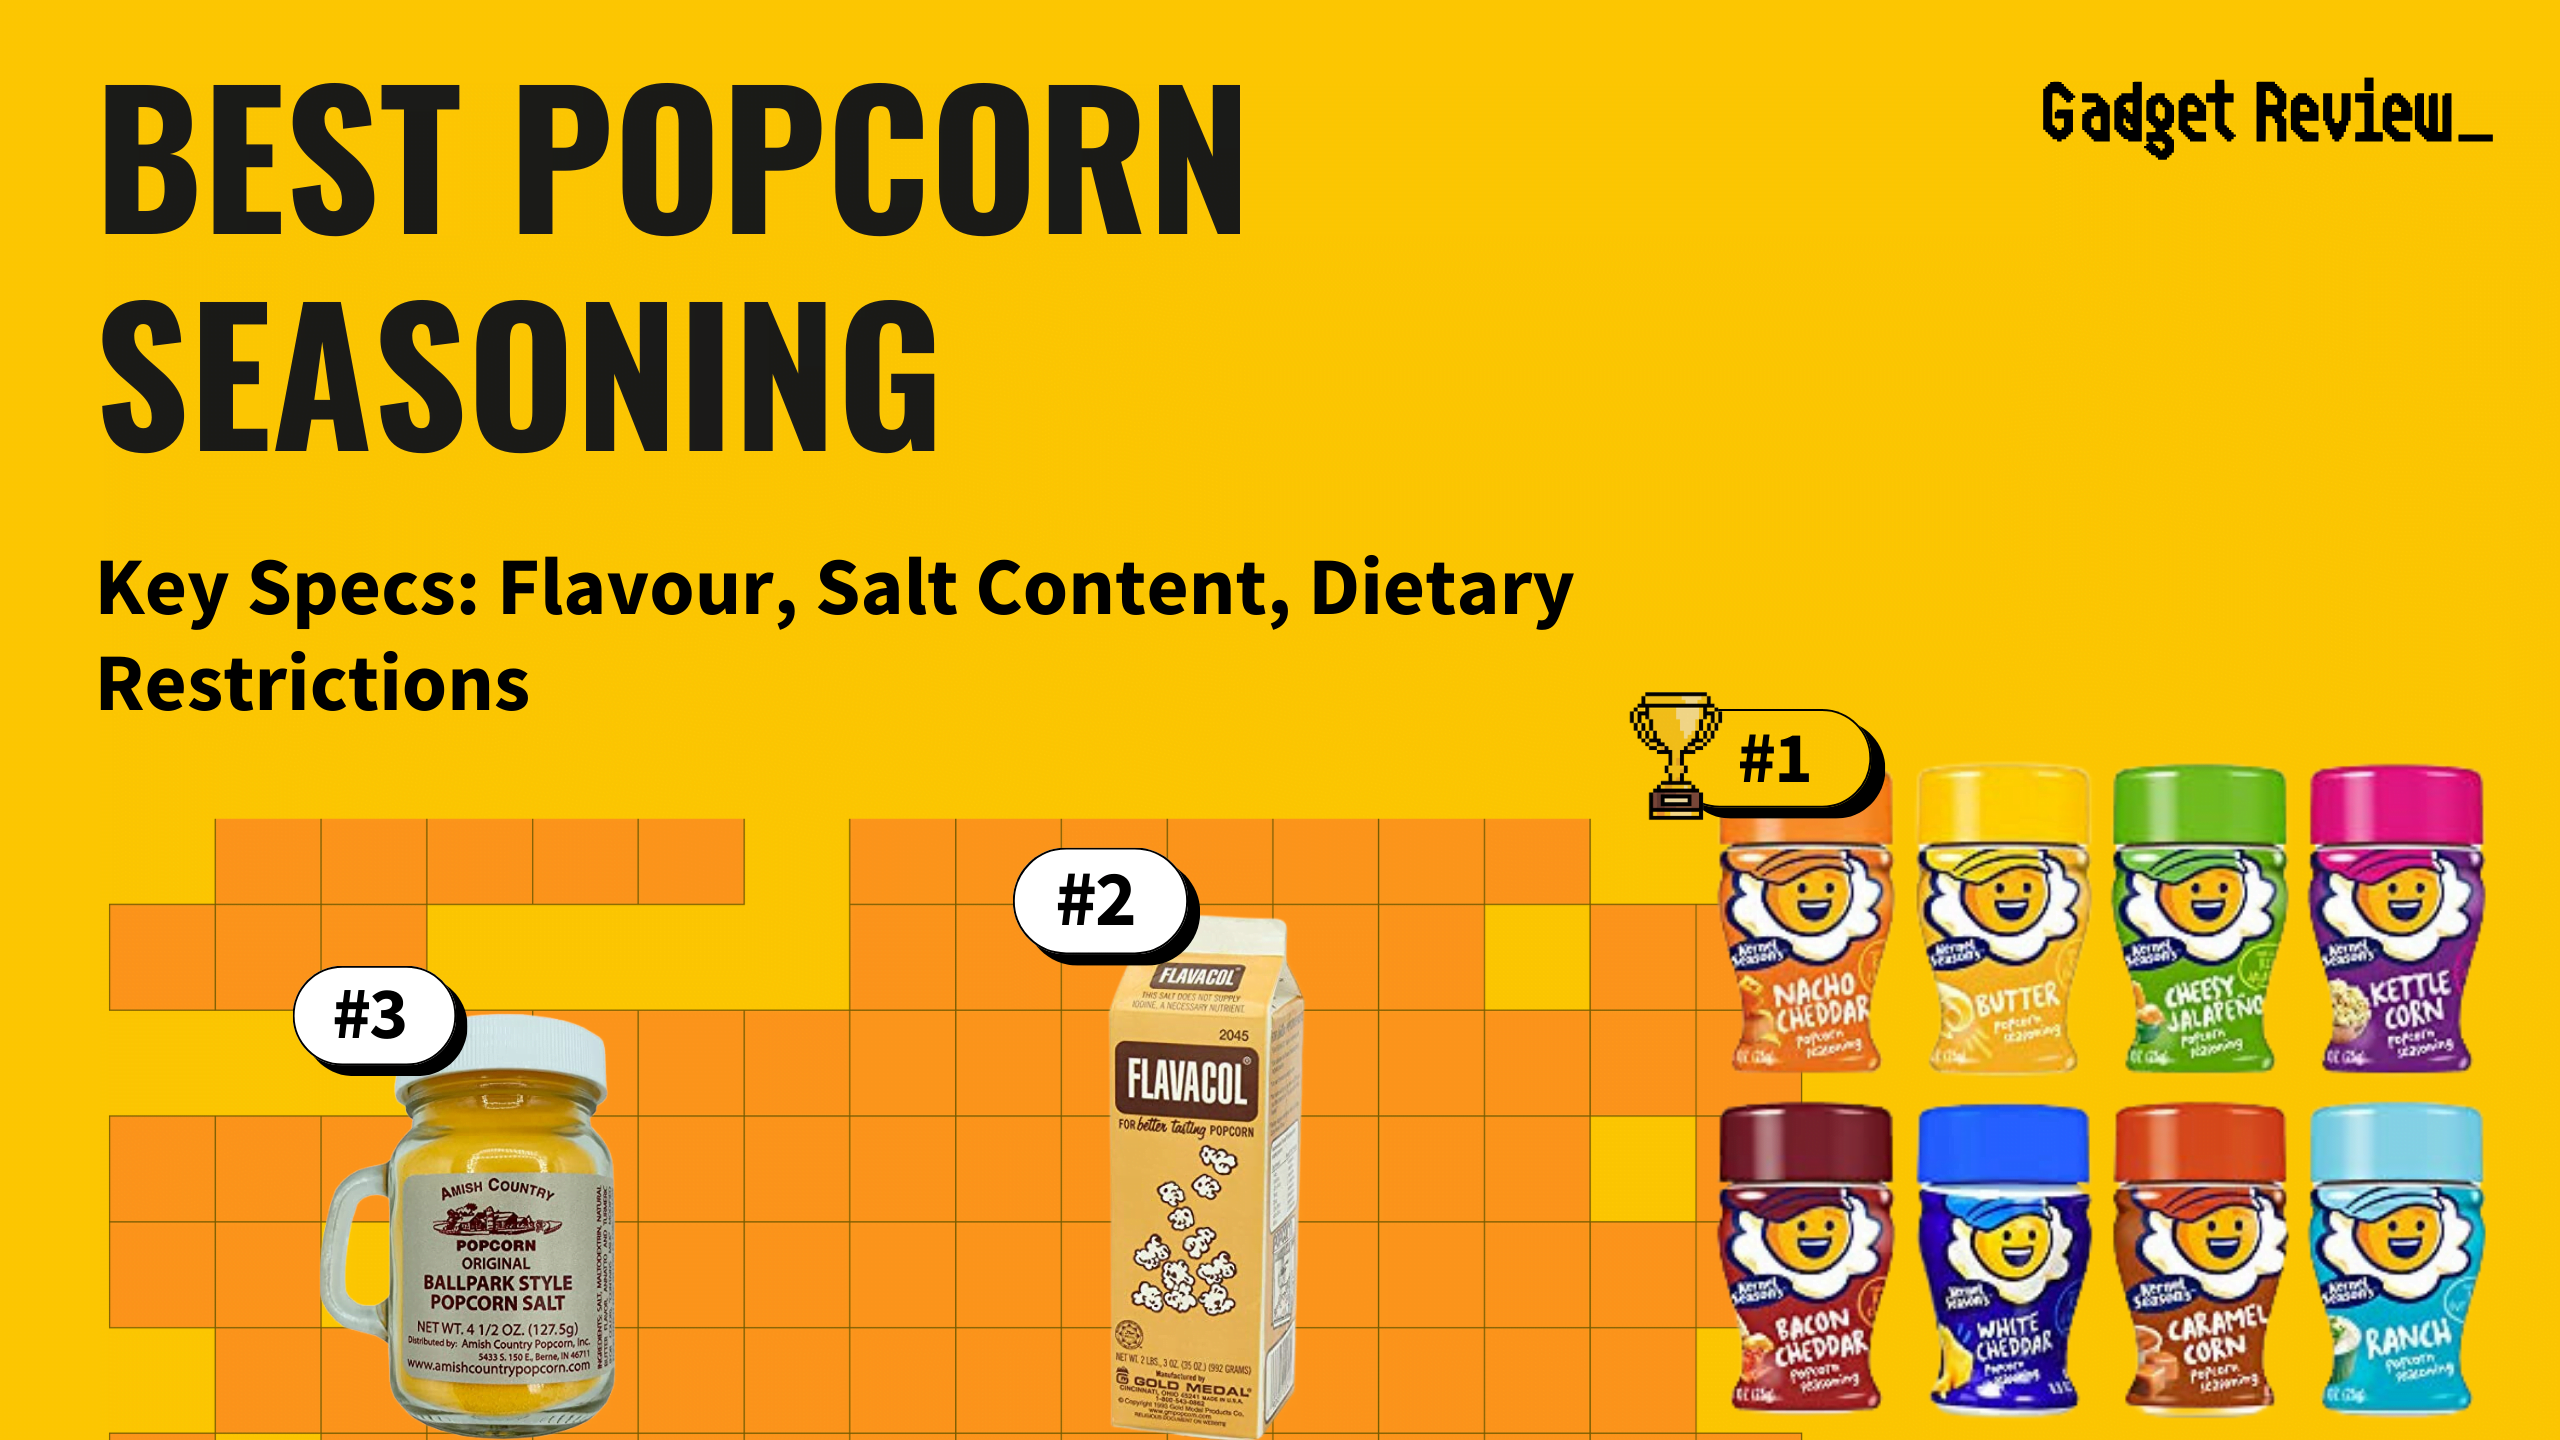 best popcorn seasoning featured image that shows the top three best kitchen product models